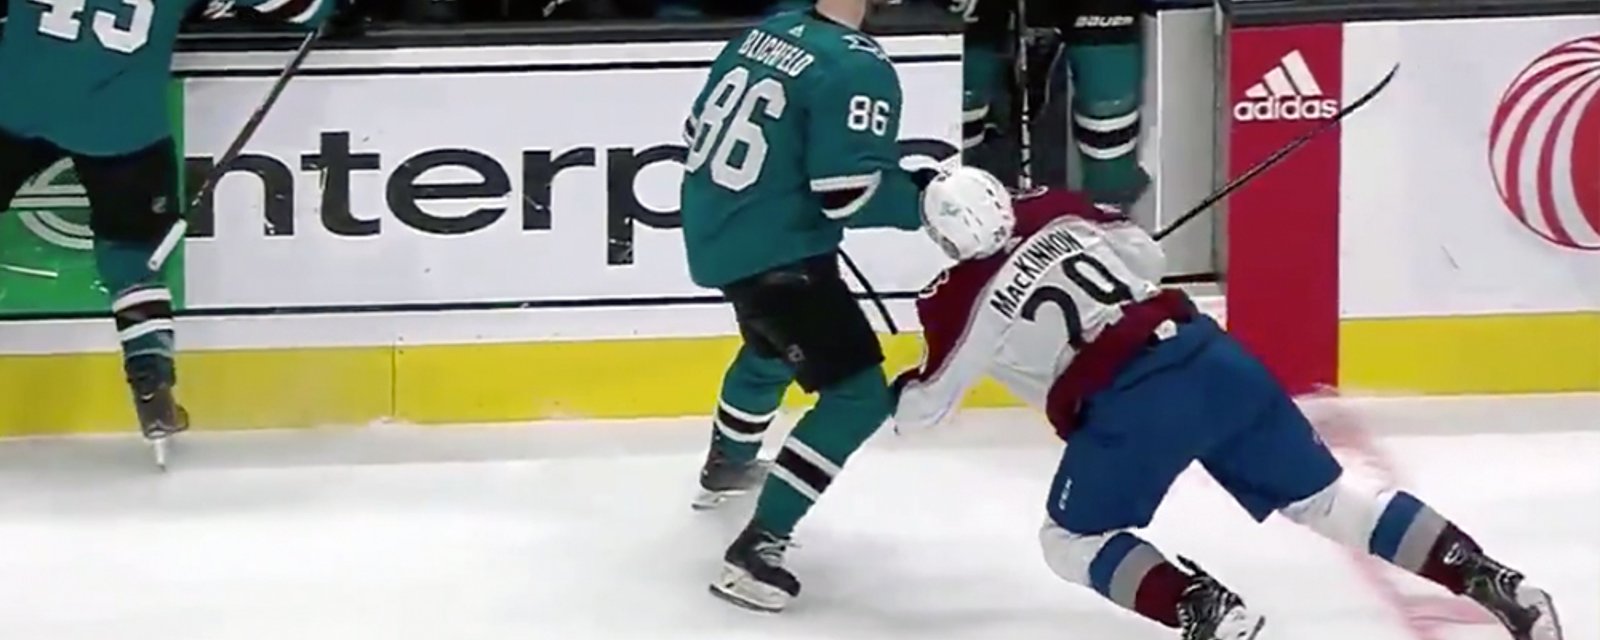 MacKinnon “doing good” after being knocked out of last night's game against Sharks